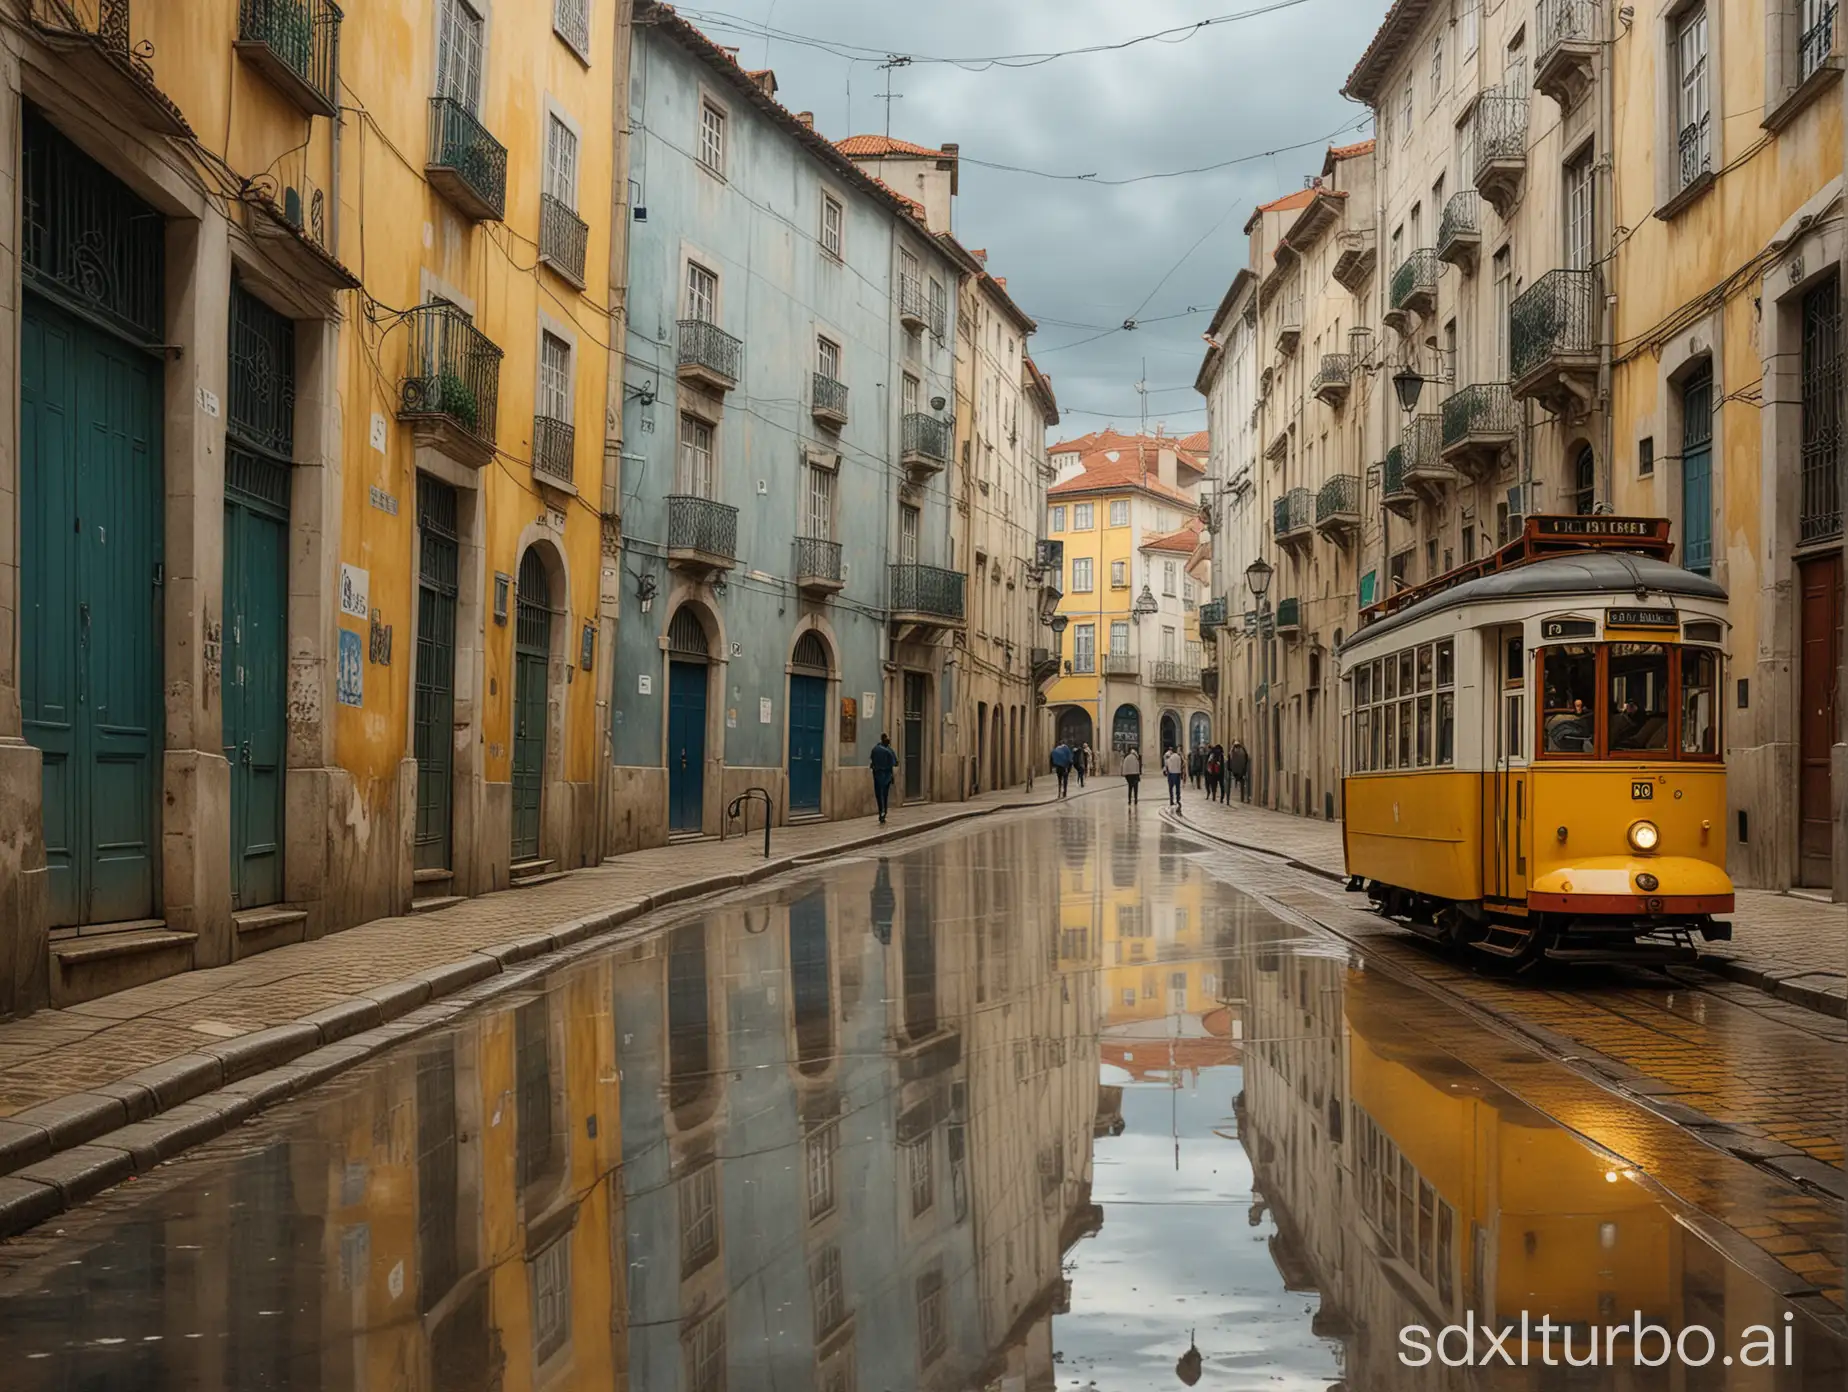 A mesmerizing conceptual oil painting depicting the bustling streets of Lisbon. A yellow tram glides gracefully along cobblesto

ne paths, reflecting the warm ambient light and casting a golden glow on the wet pavement. People with umbrellas move about, their reflections shimmering on the sidewalks. The Portuguese-style architecture is adorned with intricate details, and a striking rooster tile proudly graces the wall of a house. The sky is a beautiful blend of blue and gray, with the occasional raindrop hinting at the recent downpour. This artwork masterfully combines conceptual art, graffiti, wildlife photography, and illustration into a vibrant, enchanting scene that captures the essence of Lisbon's old city., wildlife photography, vibrant, graffiti, conceptual art, illustration